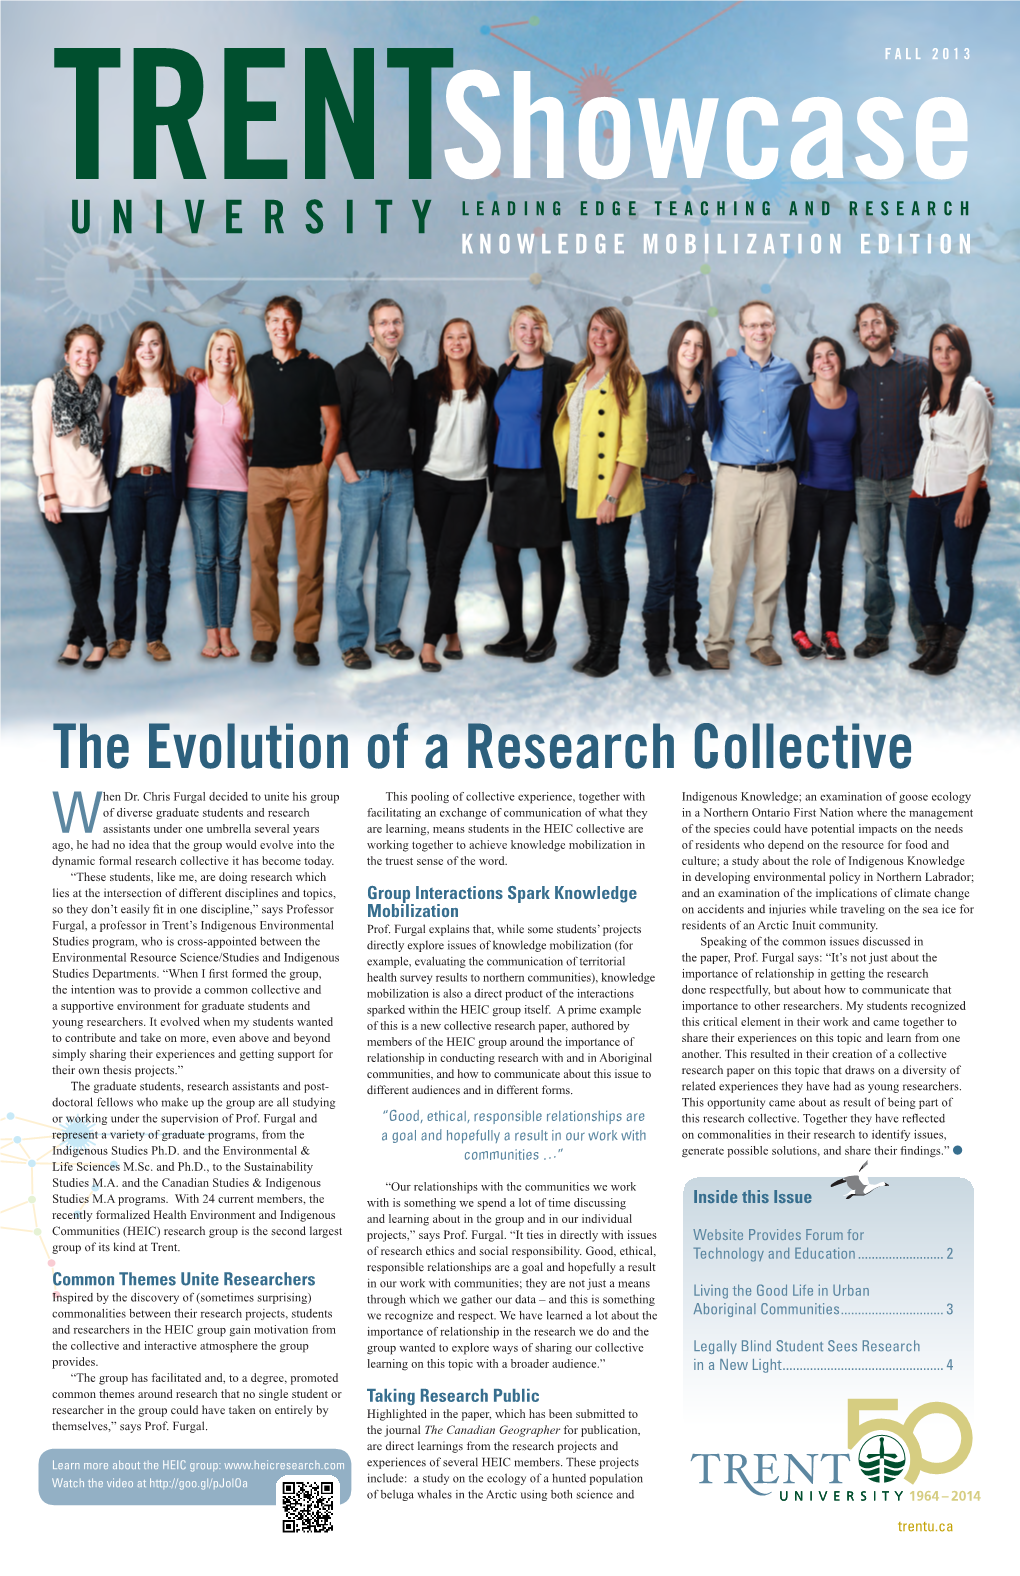 The Evolution of a Research Collective